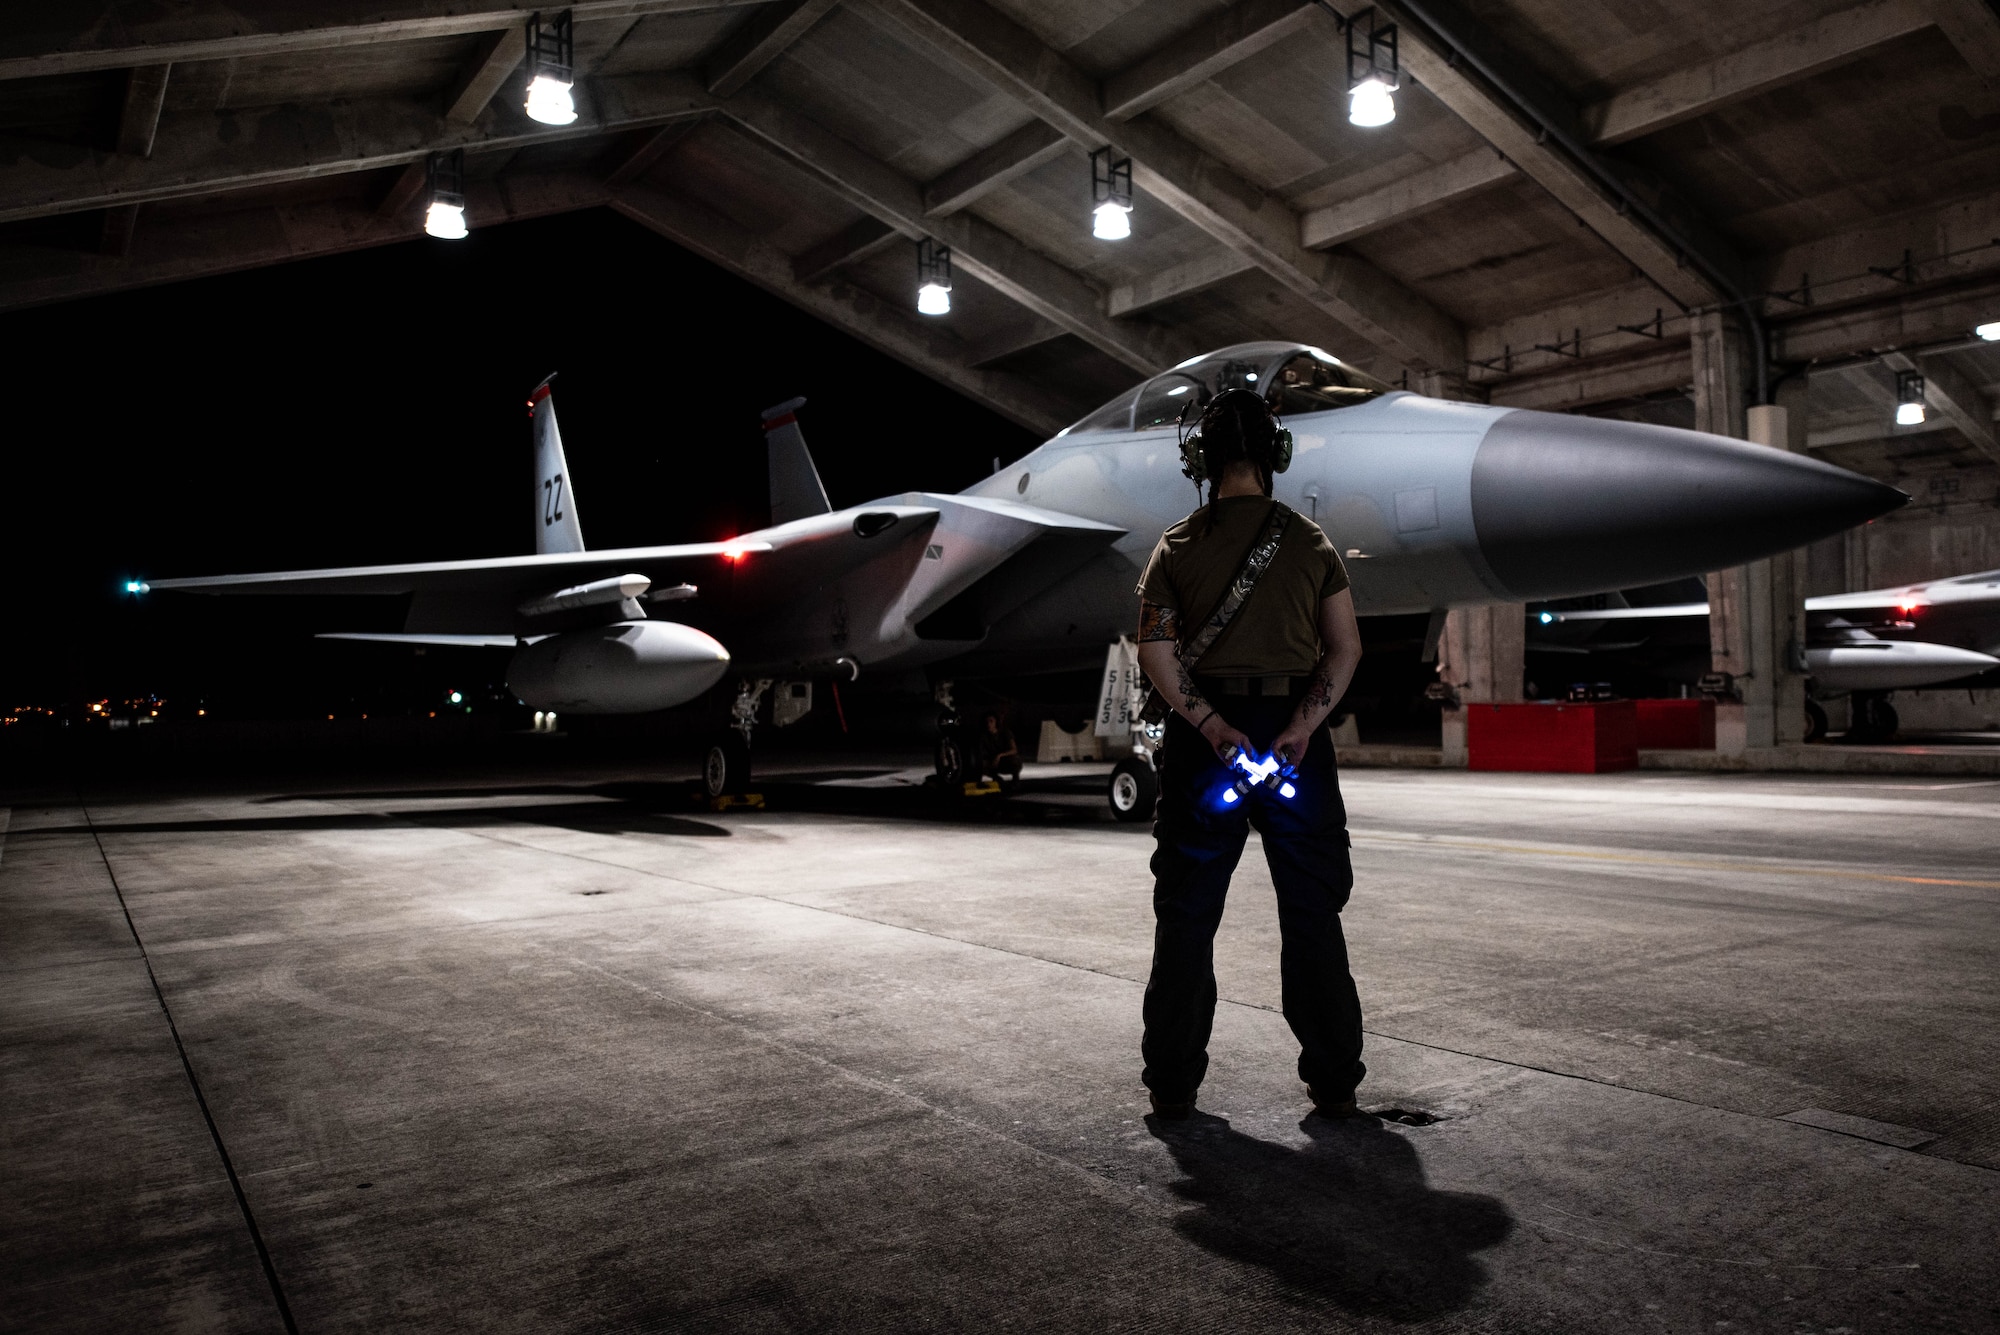 Senior Airman Allyssa Helman, 44th Aircraft Maintenance Unit crew chief, prepares to marshal an F-15C Eagle onto the flightline for Red Flag-Alaska at Kadena Air Base, Japan, April 15, 2022. Red Flag-Alaska is a Pacific Air Forces-directed field training exercise focused on improving the combat readiness of U.S. and international forces and provides training for units preparing for air and space expeditionary force tasking. (U.S. Air Force photo by Airman 1st Class Sebastian Romawac)